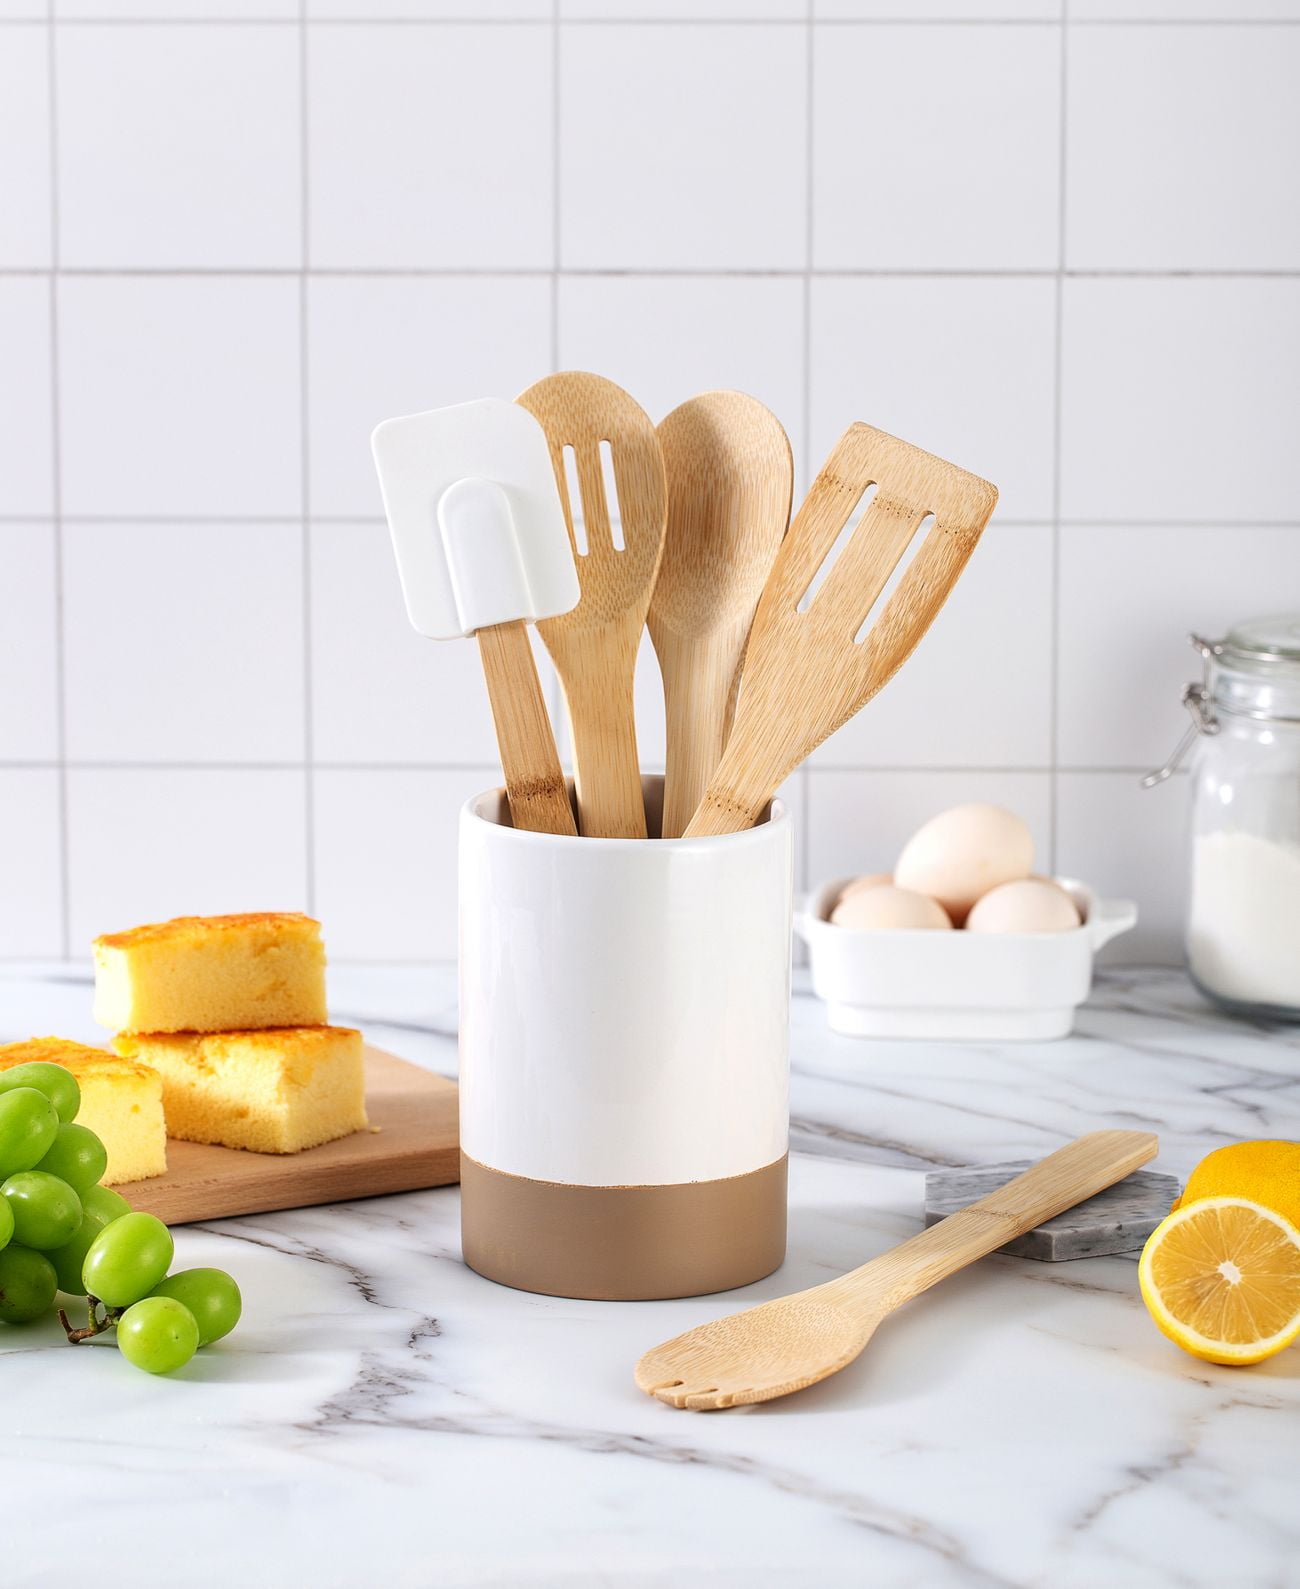 7-Piece Silicone and Bamboo Kitchen Utensils Set with Holder for Cooking,  Virtually Non-Stick, with …See more 7-Piece Silicone and Bamboo Kitchen